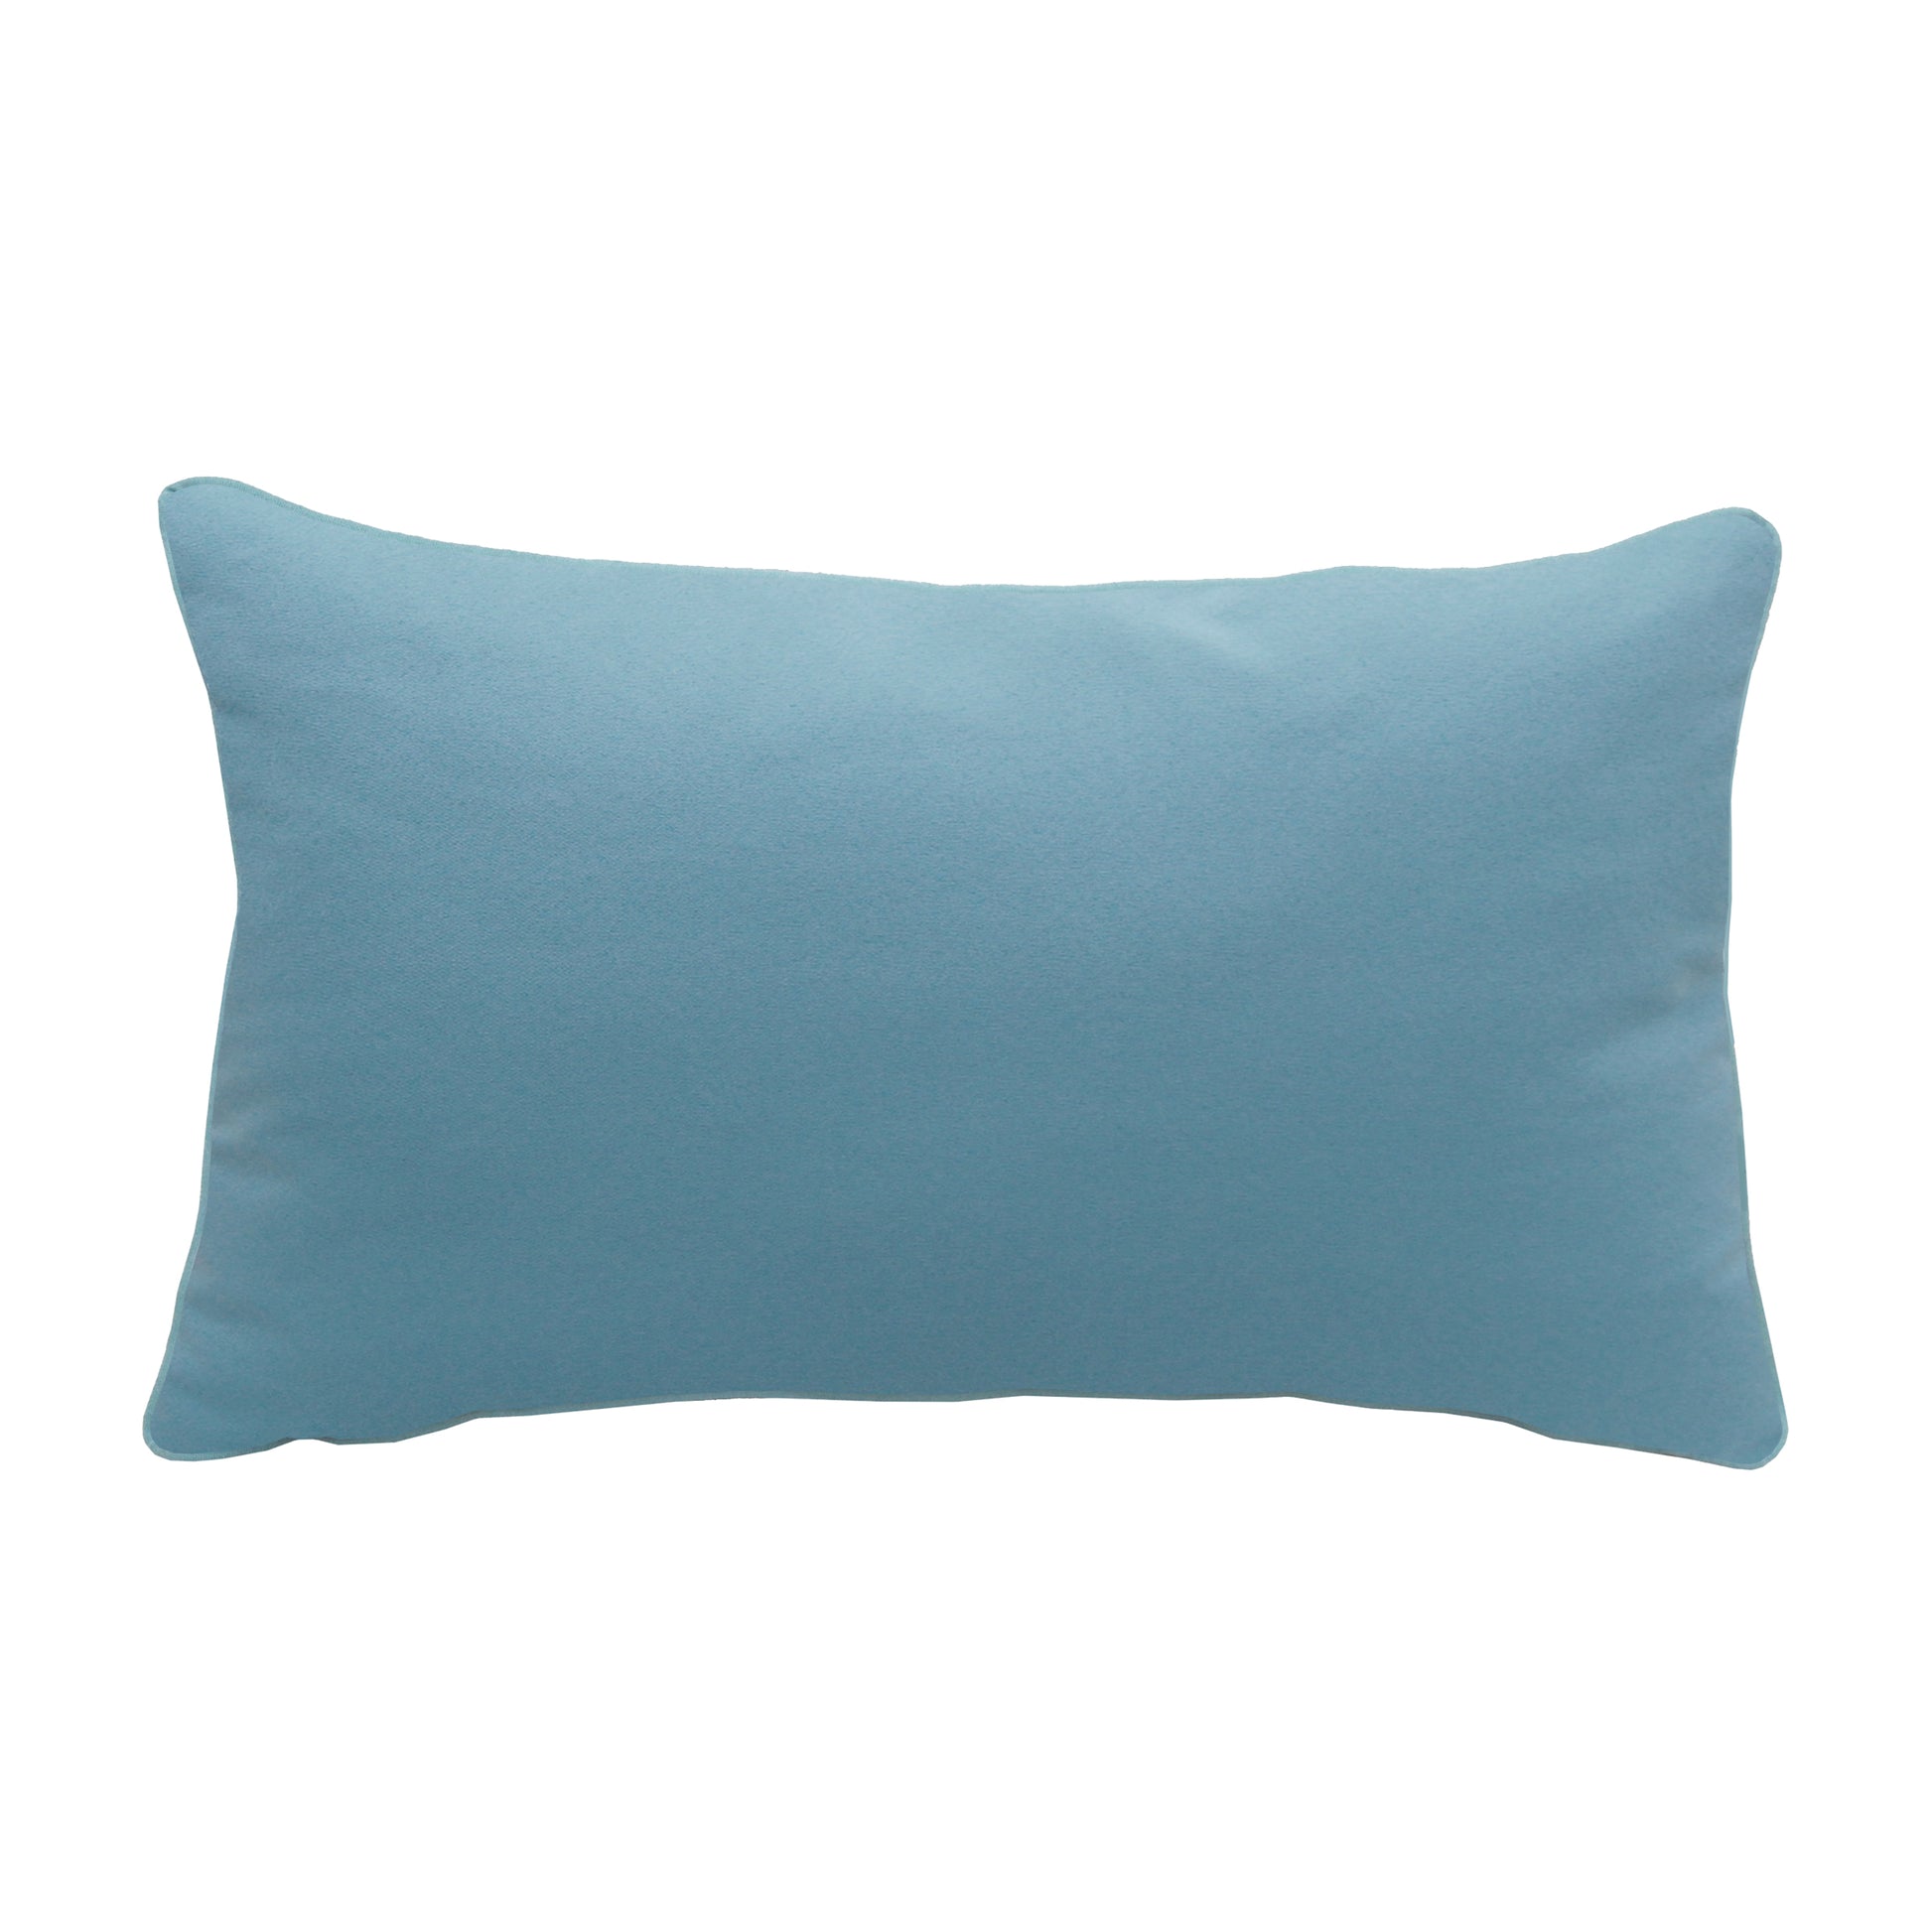 Solid blue fabric; back of Sea Glass Tribal Dolphin pillow.